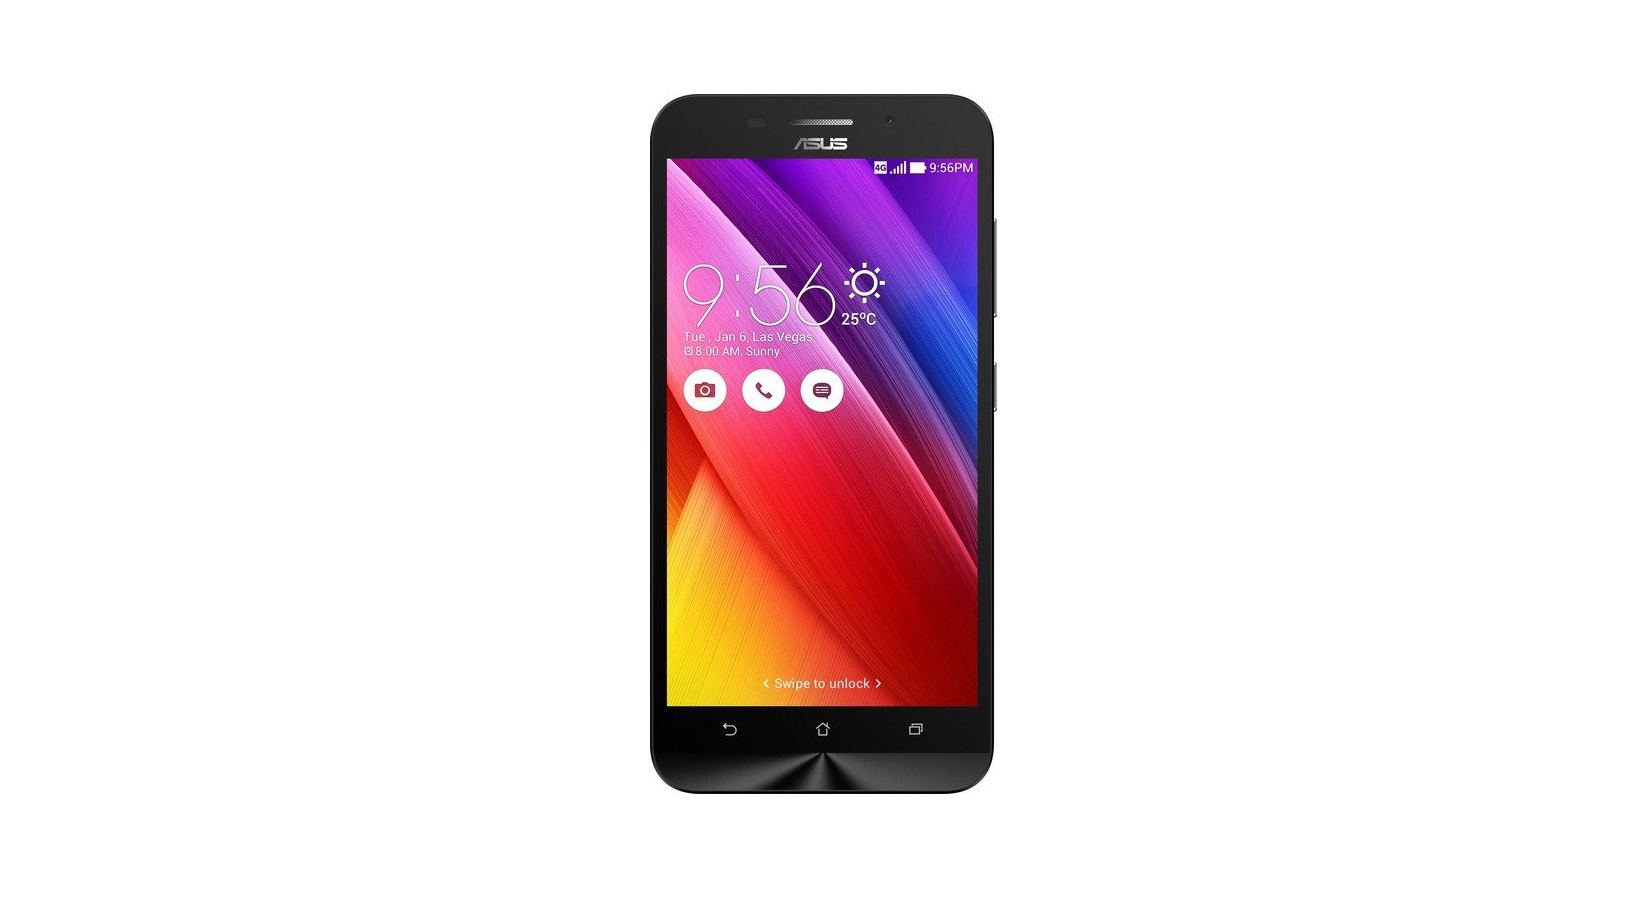 How to Root Asus Zenfone Max ZC550KL with Magisk without TWRP